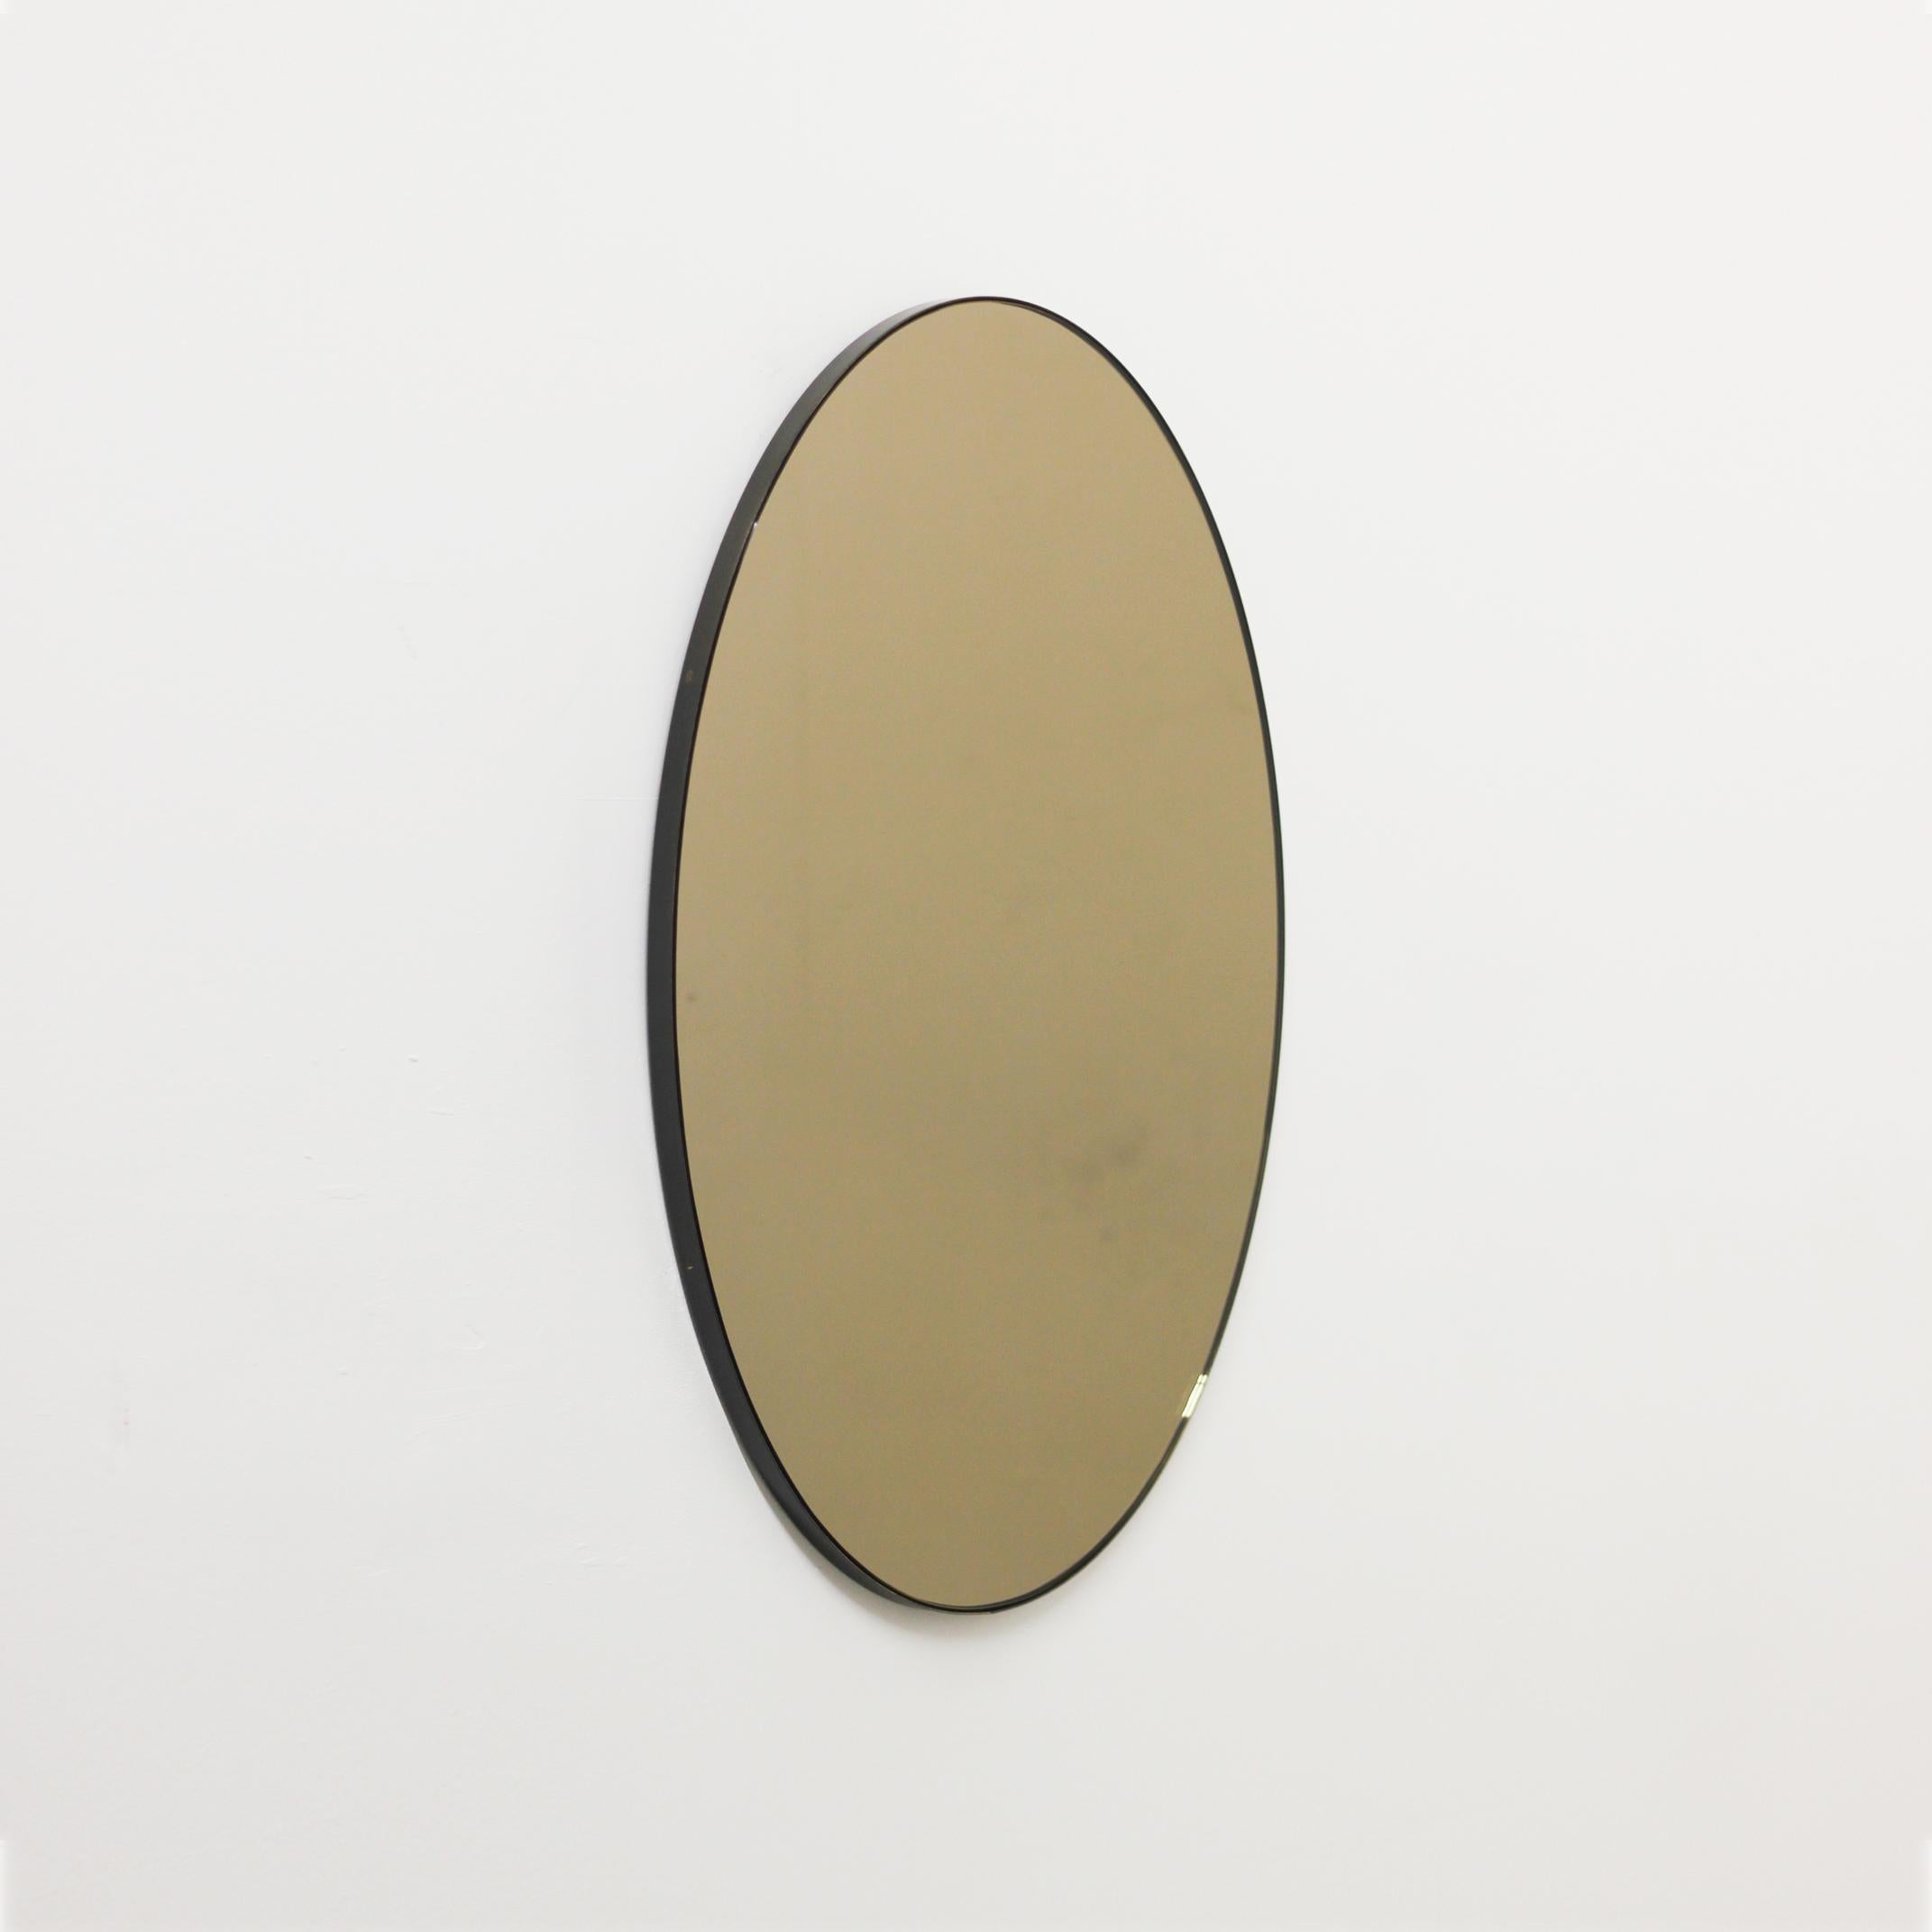 Contemporary oval bronze tinted mirror with an elegant bronze patina brass frame. Designed and handcrafted in London, UK.

Our mirrors are designed with an integrated French cleat (split batten) system that ensures the mirror is securely mounted